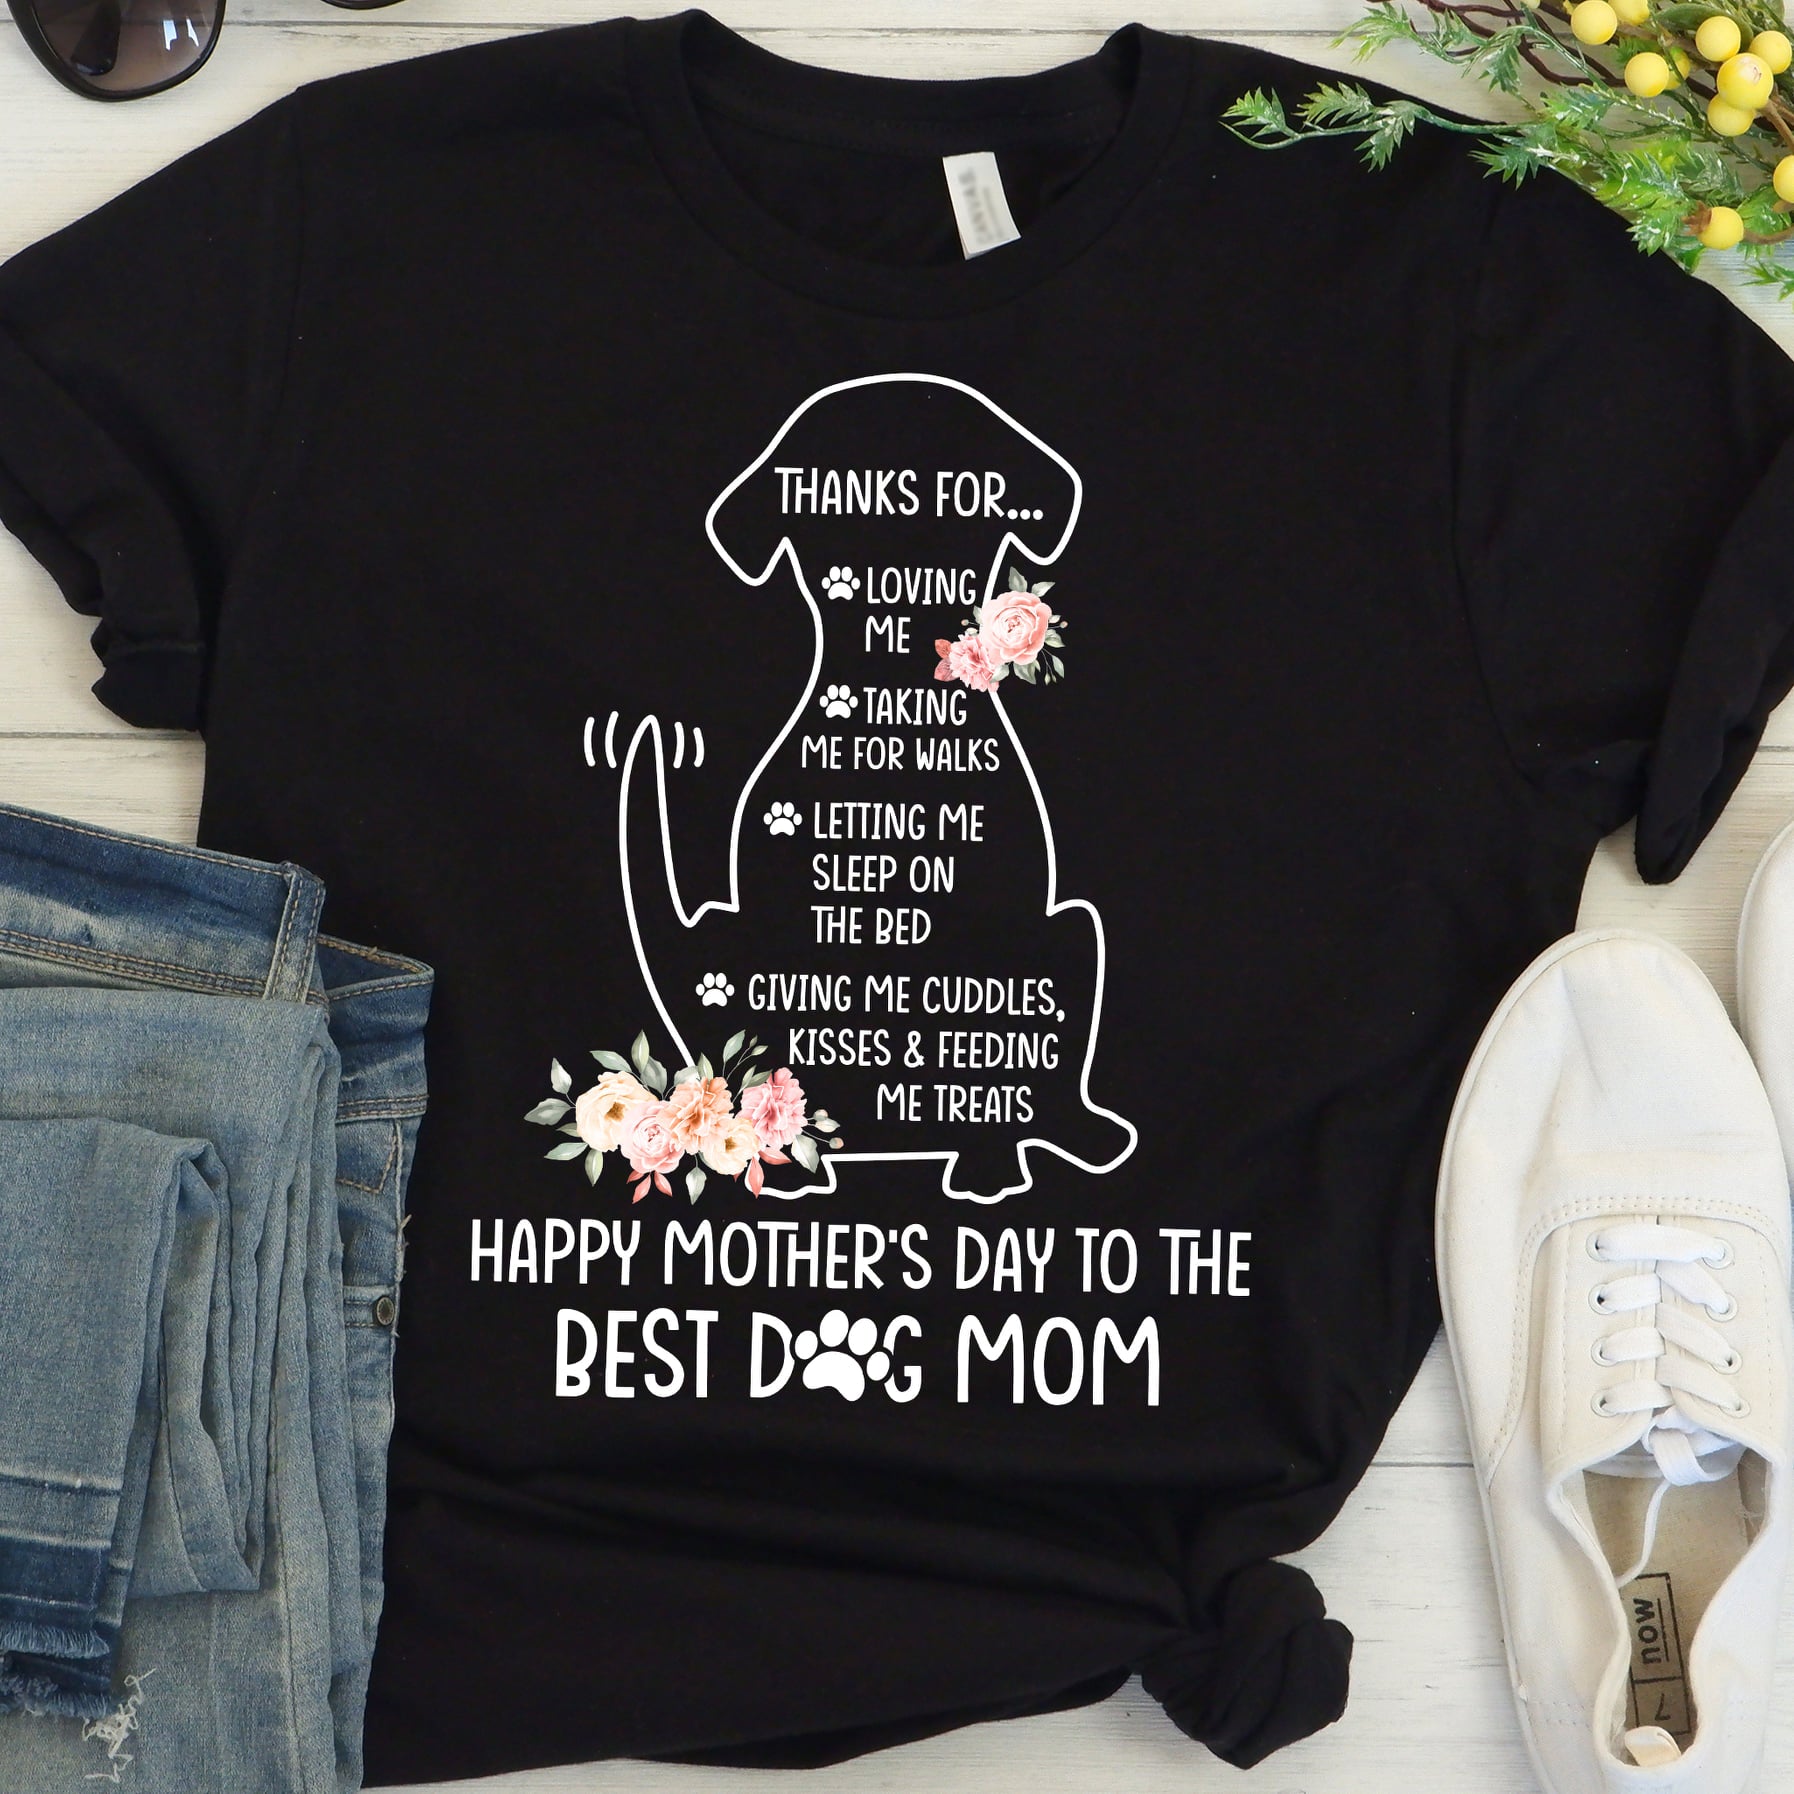 Thanks For Loving Me T Shirt Hoodie, Meaningful Mother’s Day Gift, Happy Mother’s Day Ideas 1617090060291.jpg